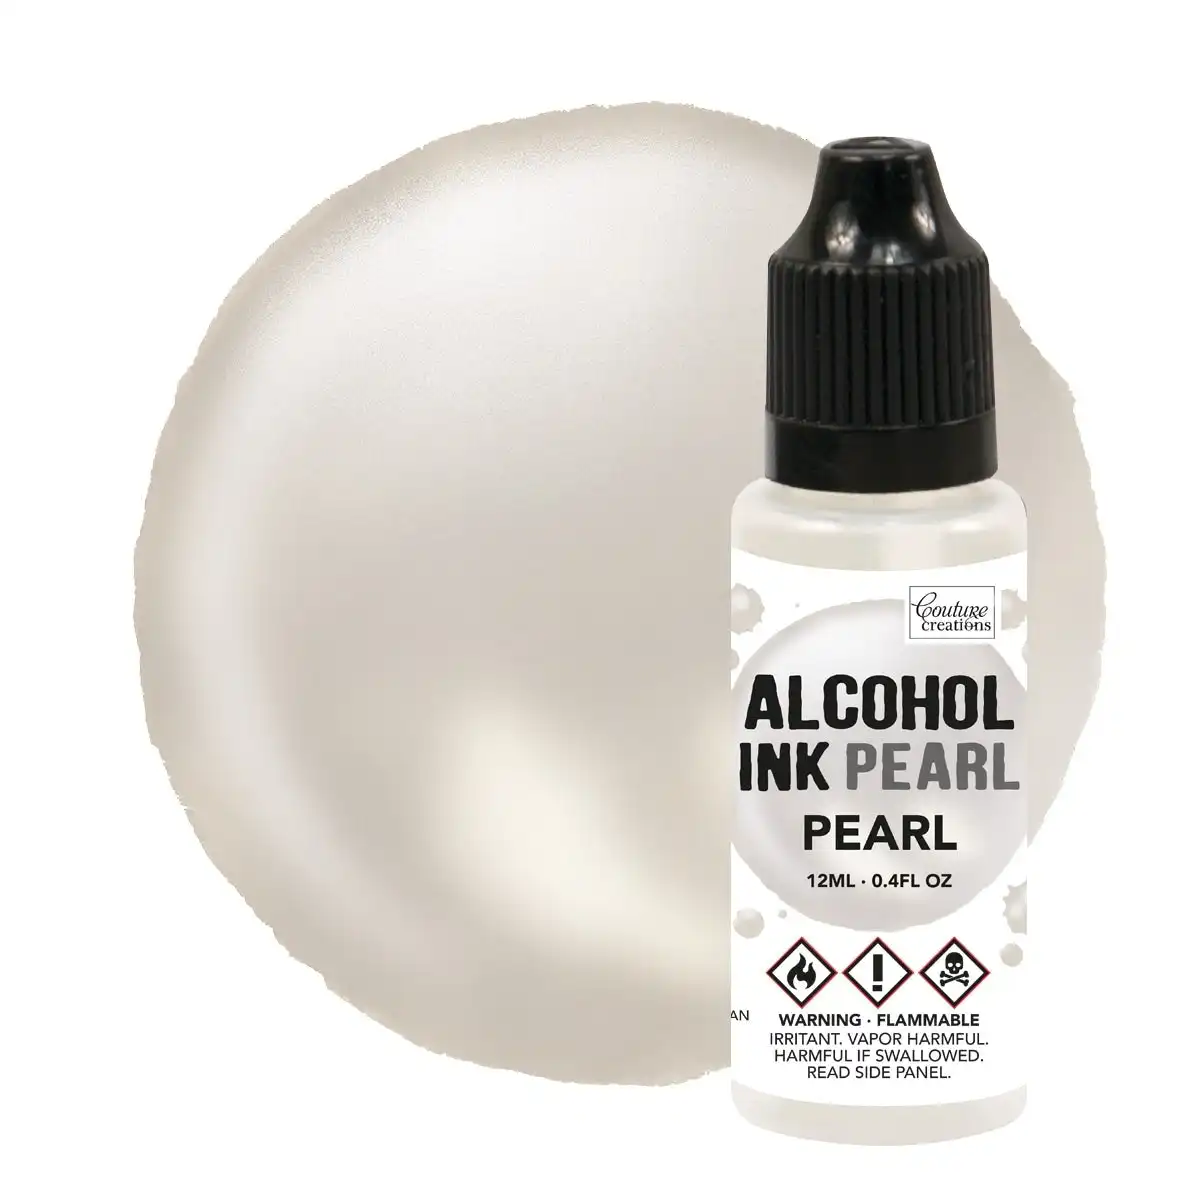 Couture Creations Alcohol Ink - Pearl Pearl - 12ml